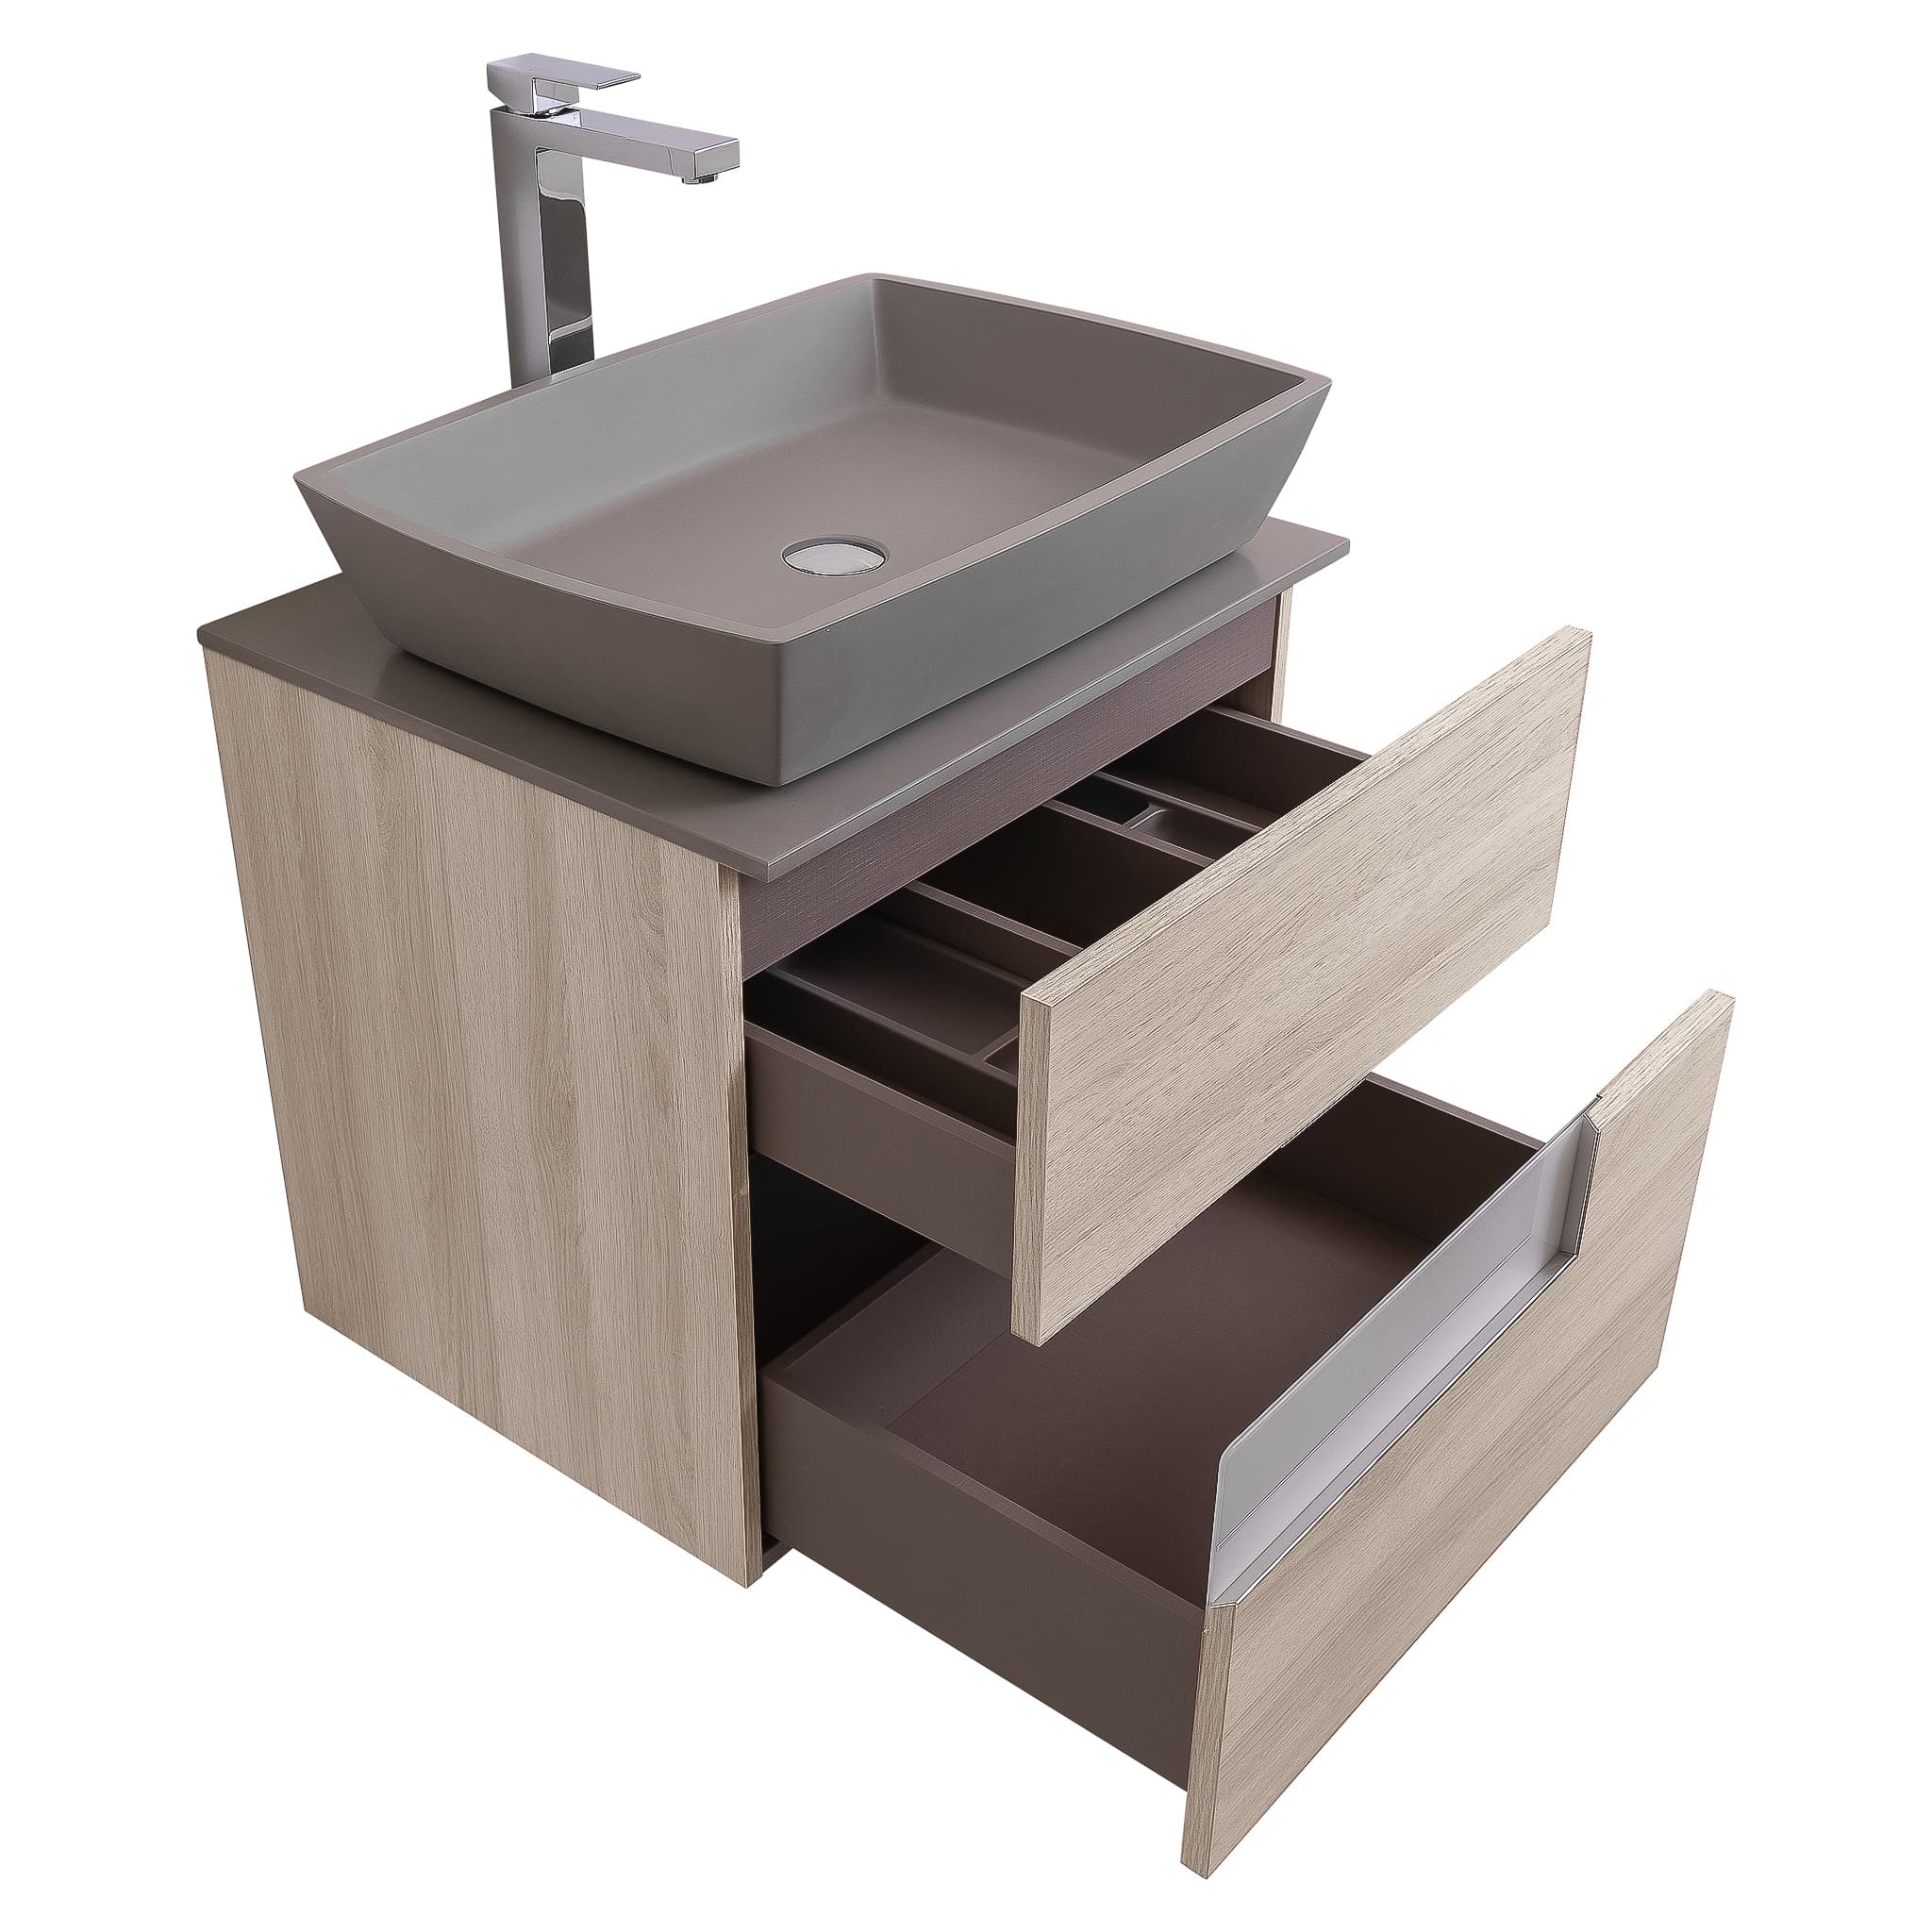 Vision 23.5 Natural Light Wood Cabinet, Solid Surface Flat Grey Counter And Square Solid Surface Grey Basin 1316, Wall Mounted Modern Vanity Set